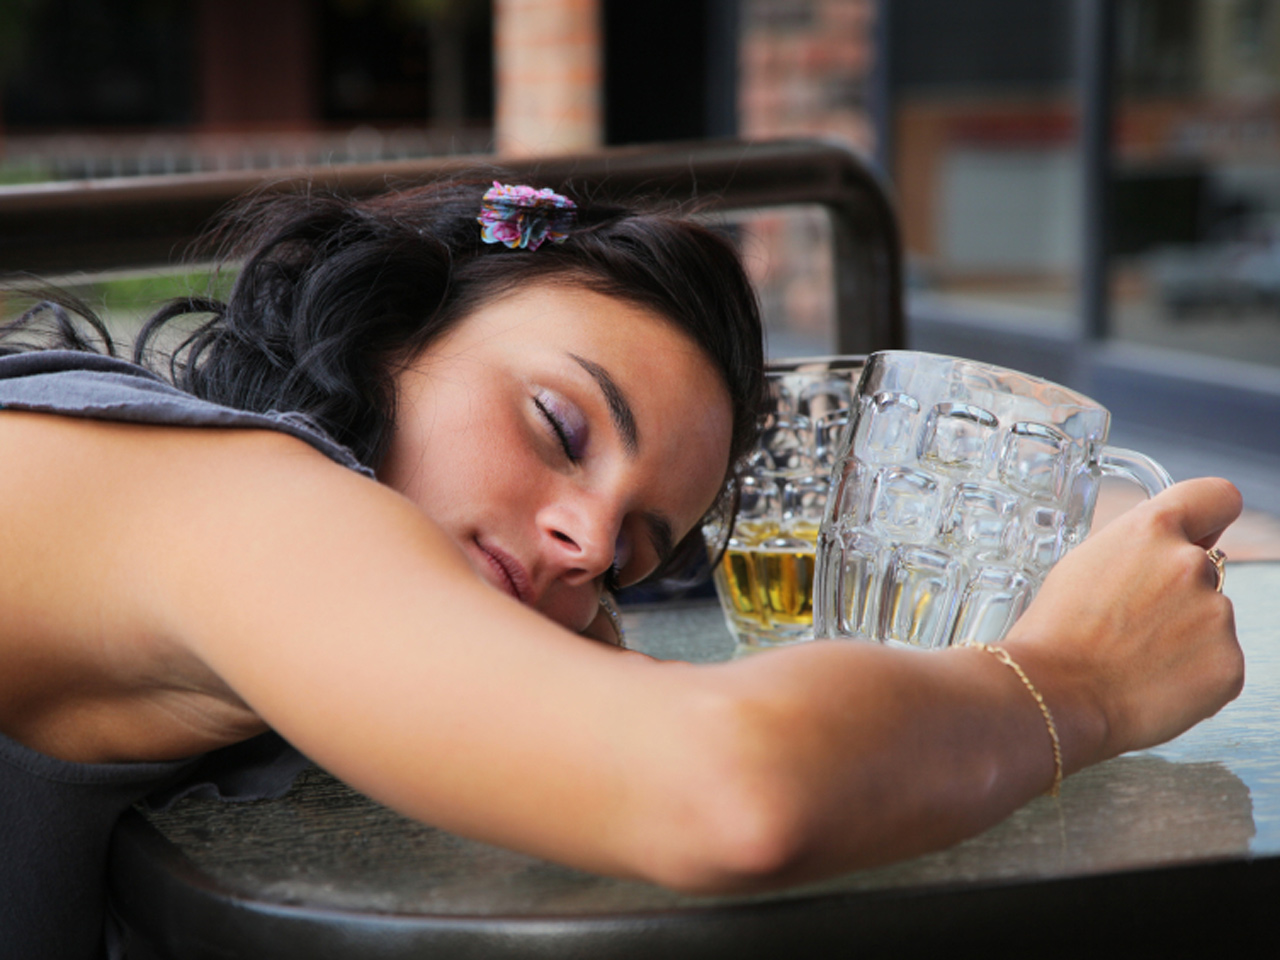 Study Teens Who Watch Movies Featuring Booze More Likely To Binge Drink Cbs News